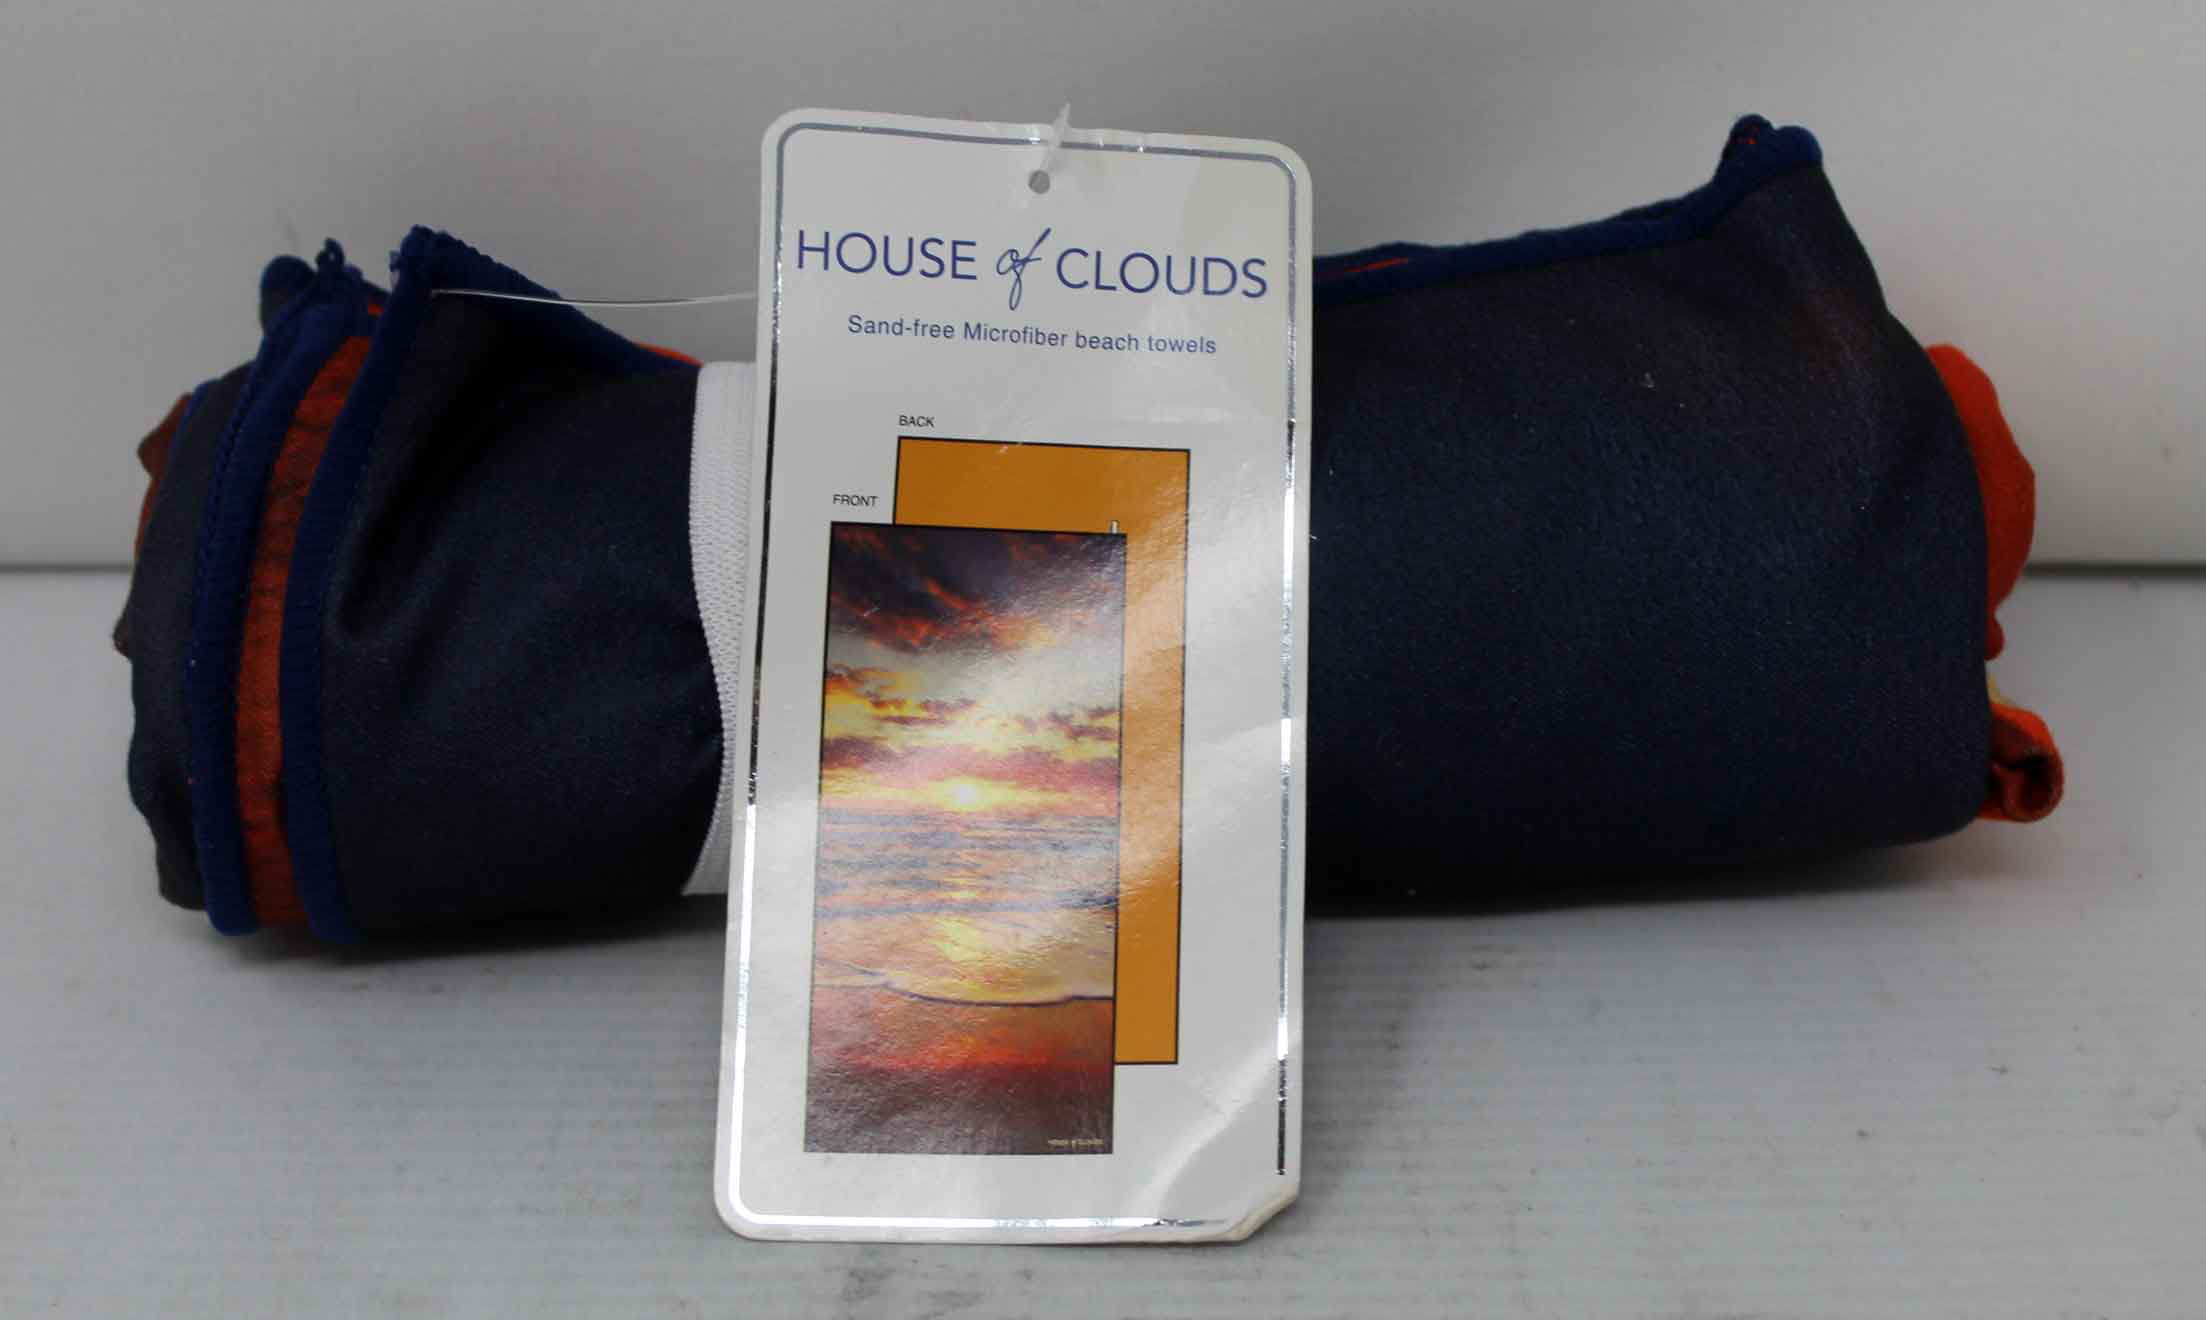 House Of Clouds Sand Free Microfiber Beach Towels 1 Count Walmart com